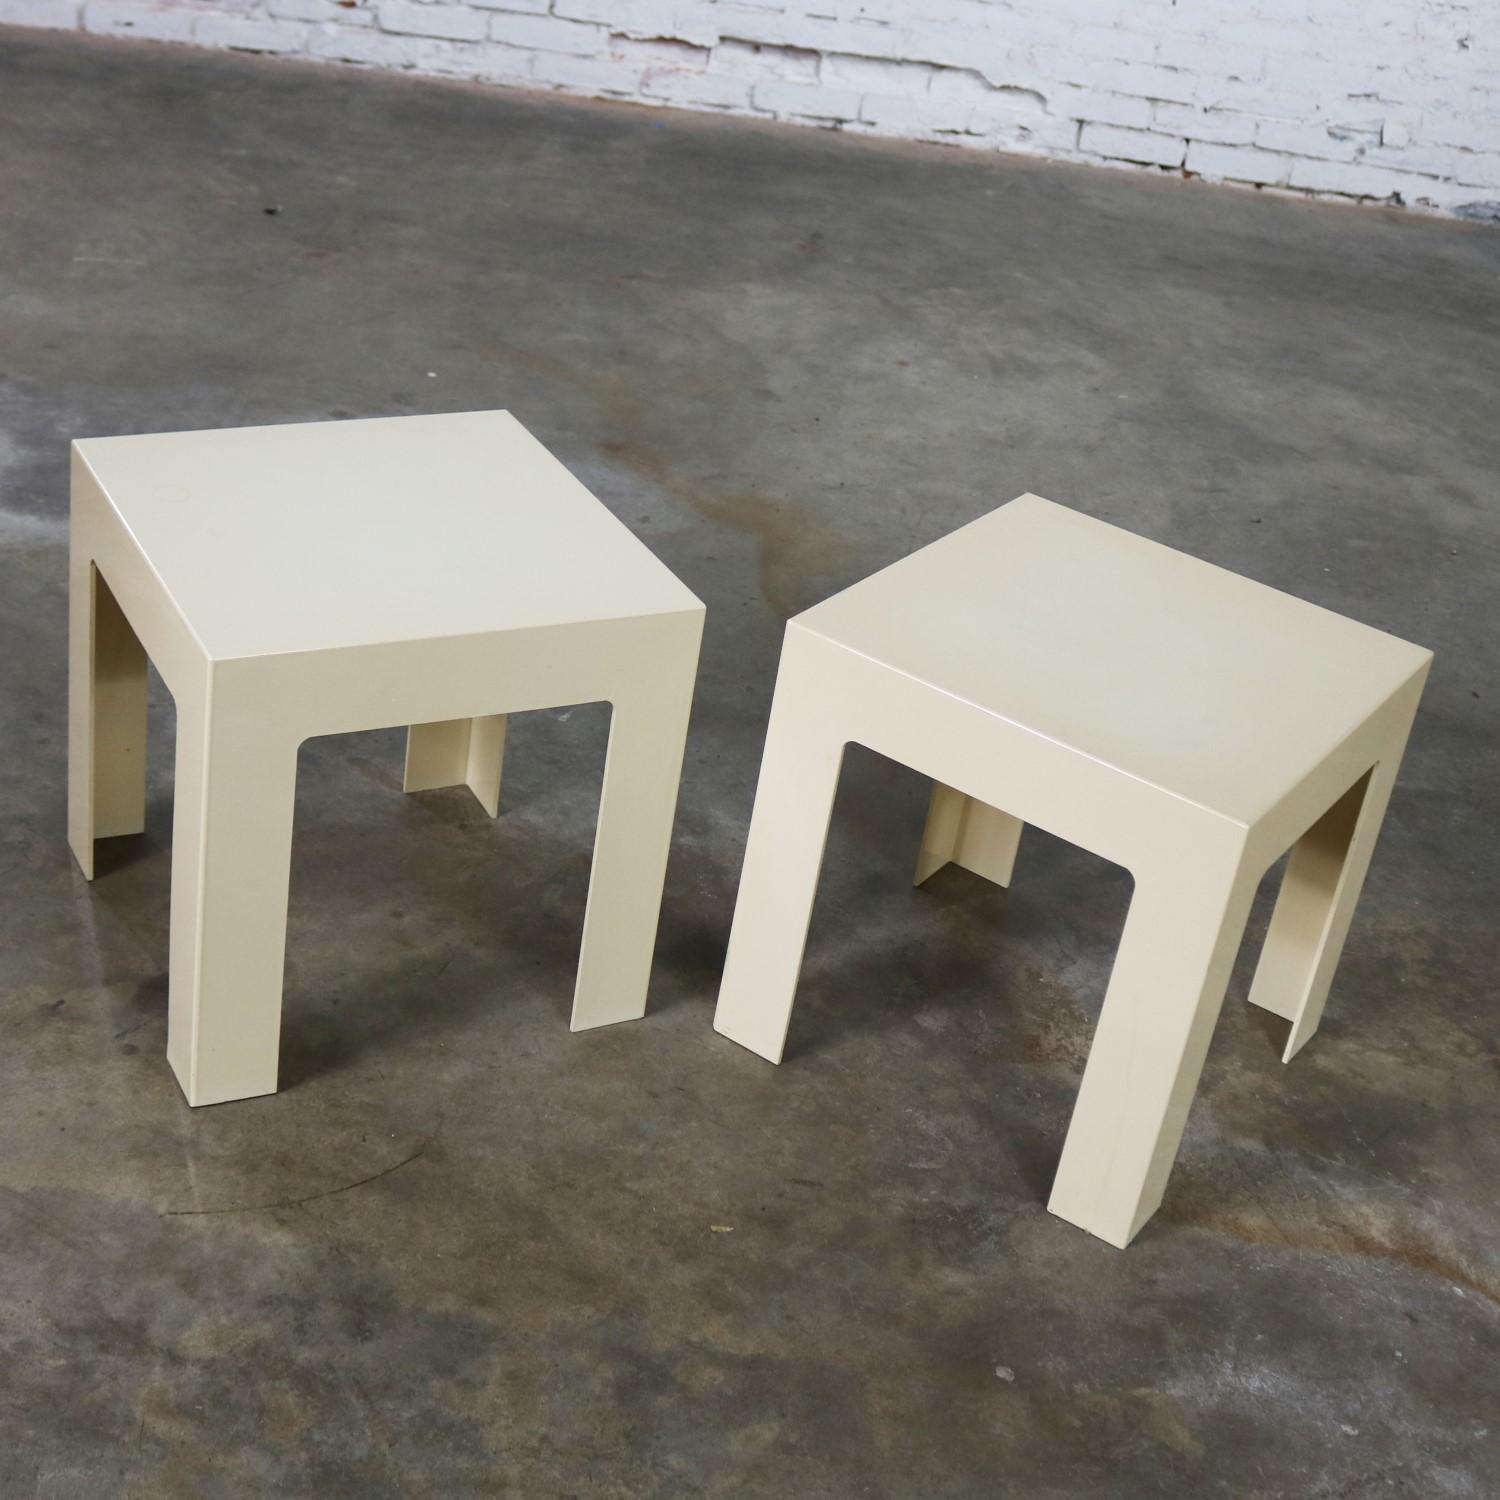 Wonderful pair of heavy plastic parsons square side tables. They are both antique white but just a shade different. Done in the style of Kartell or Syroco although unsigned. They are in fabulous vintage condition with normal wear and tear but no